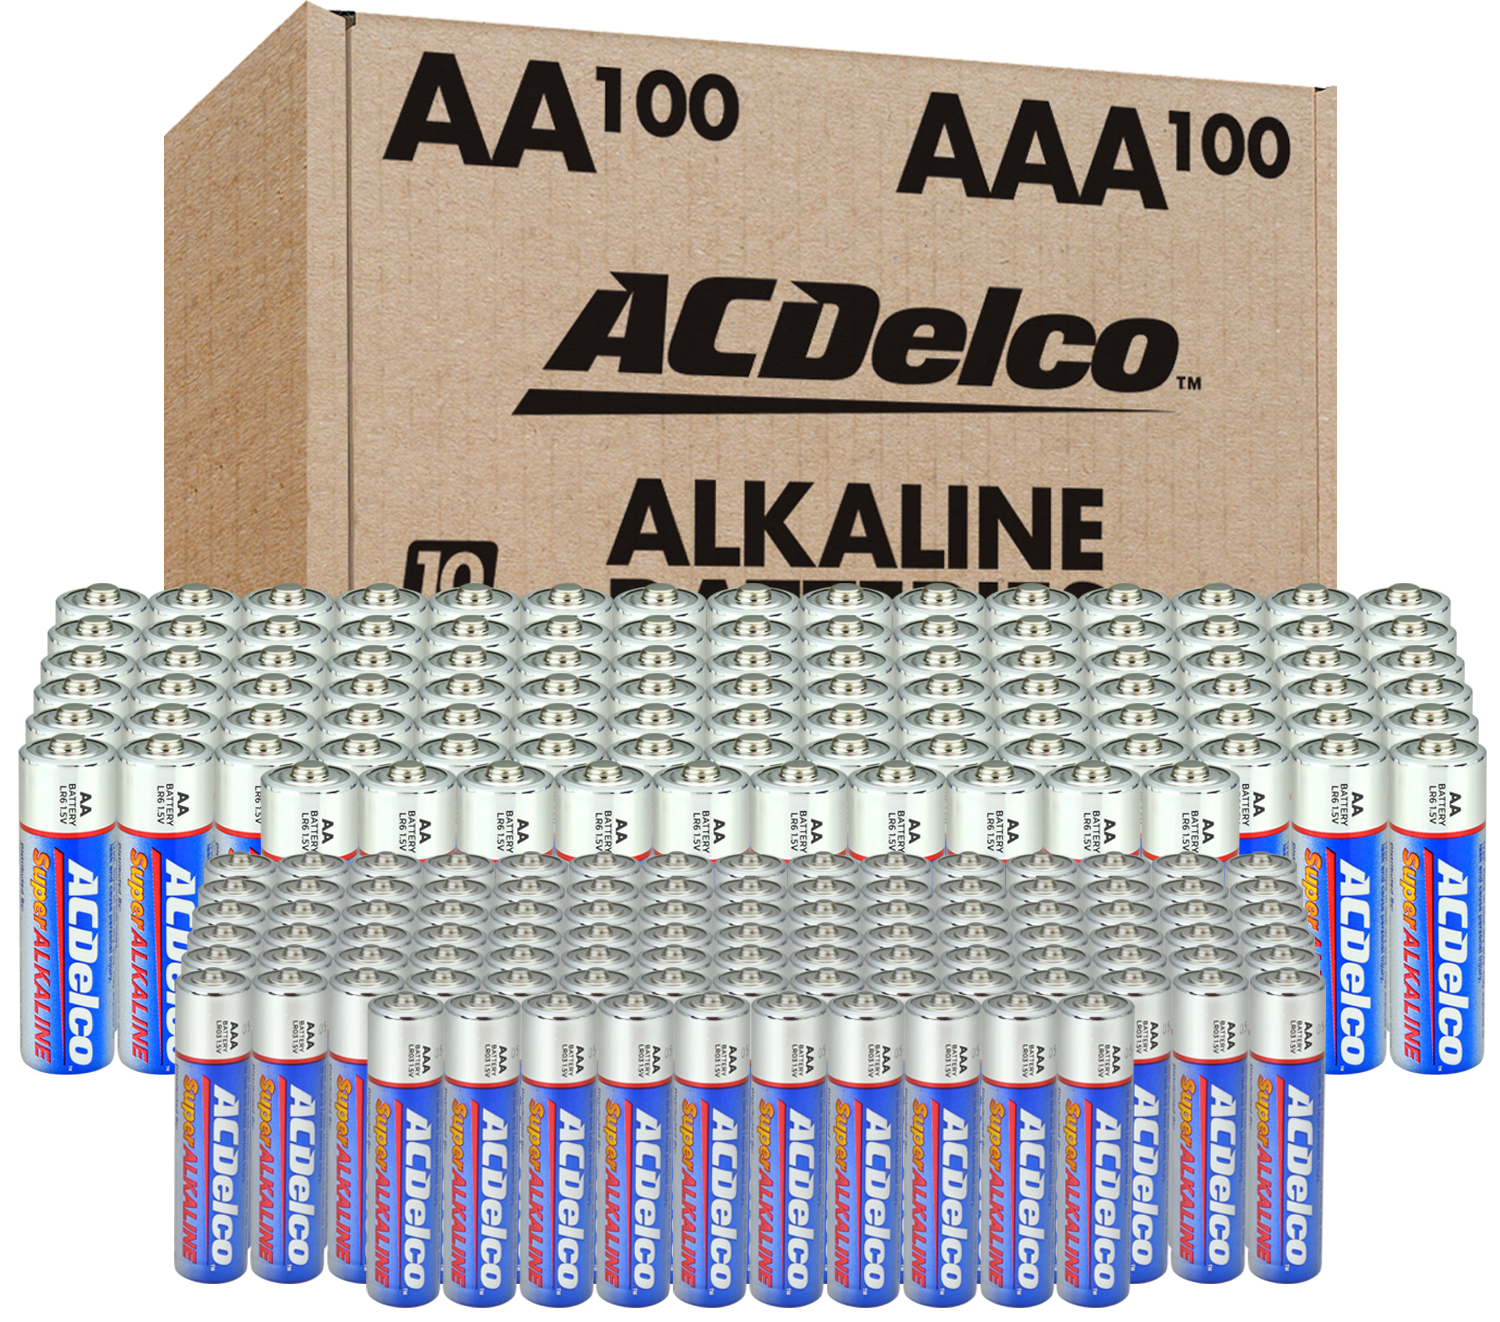 ACDelco AA and AAA Super Alkaline Batteries, 100-Count of AA and 100-Count of AAA - image 1 of 10